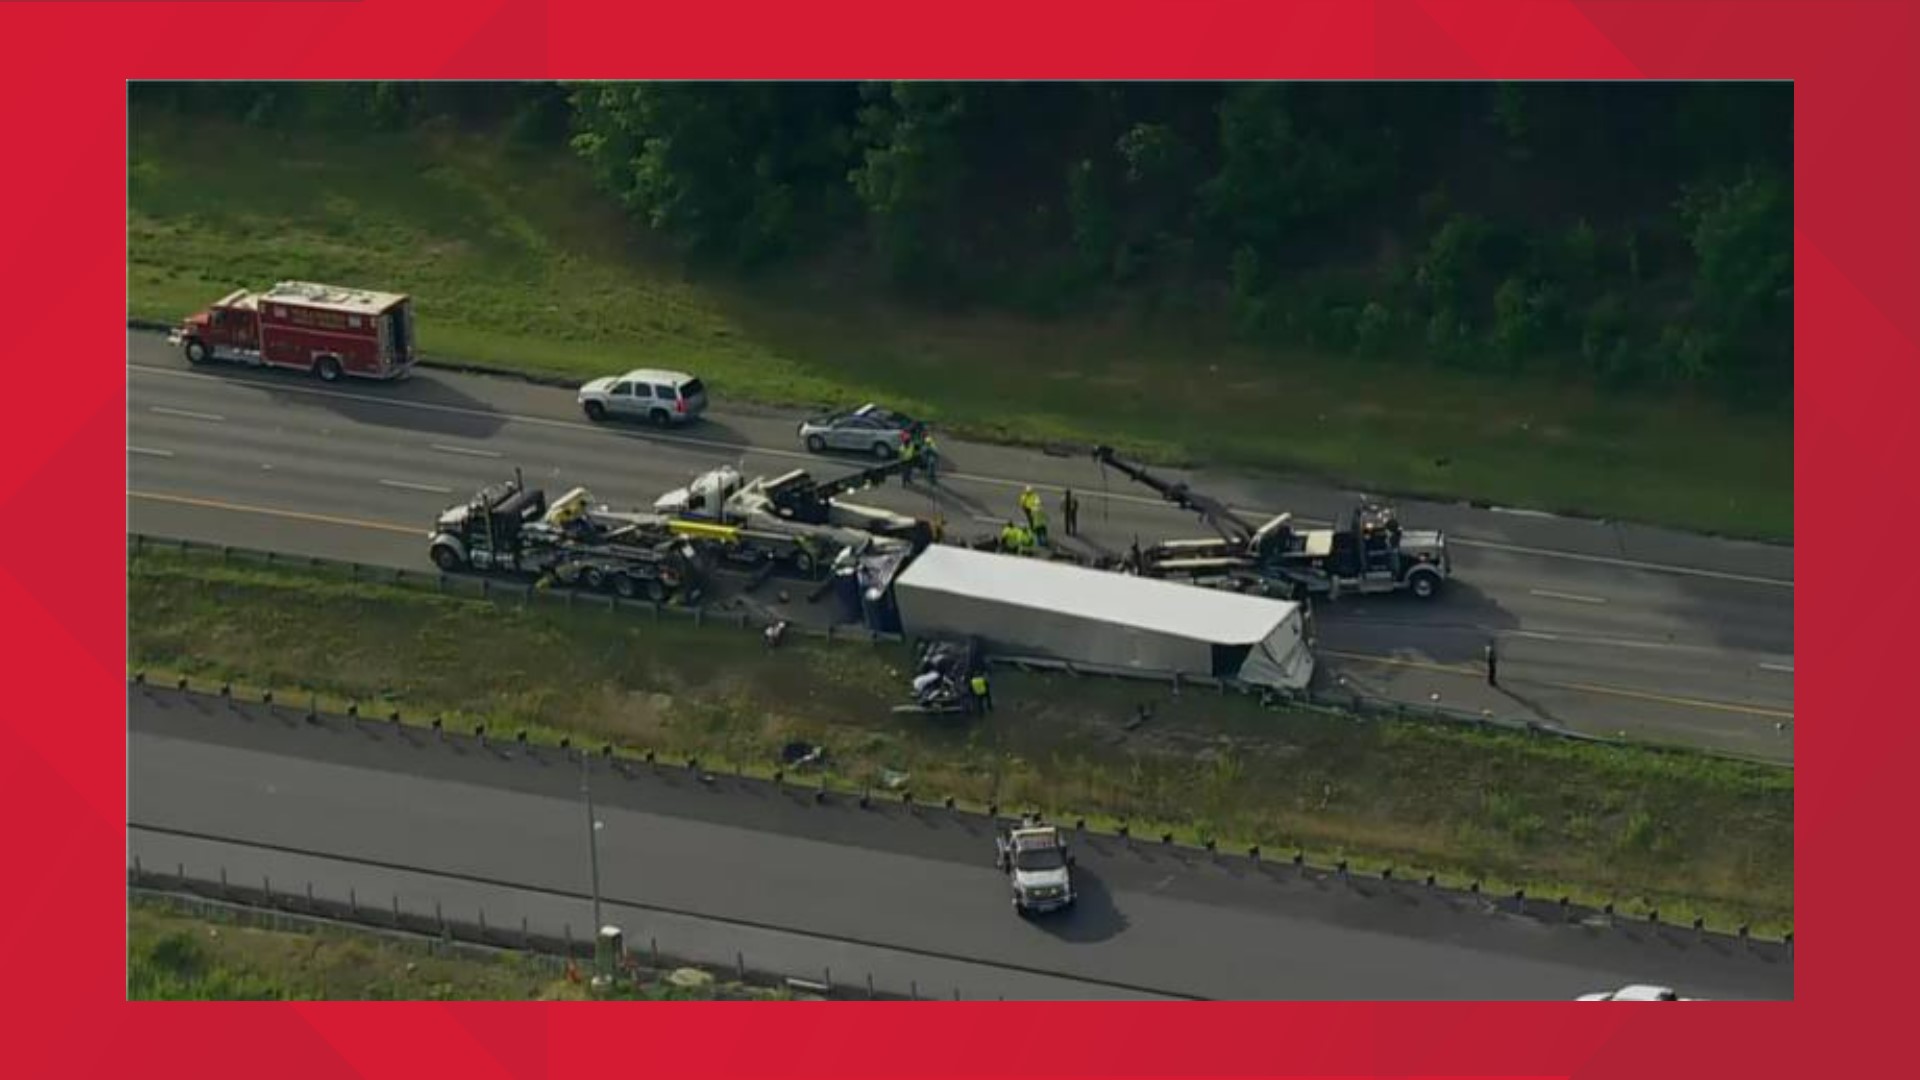 Two people were killed and one person was injured after a multi-car crash involving an overturned tractor-trailer.